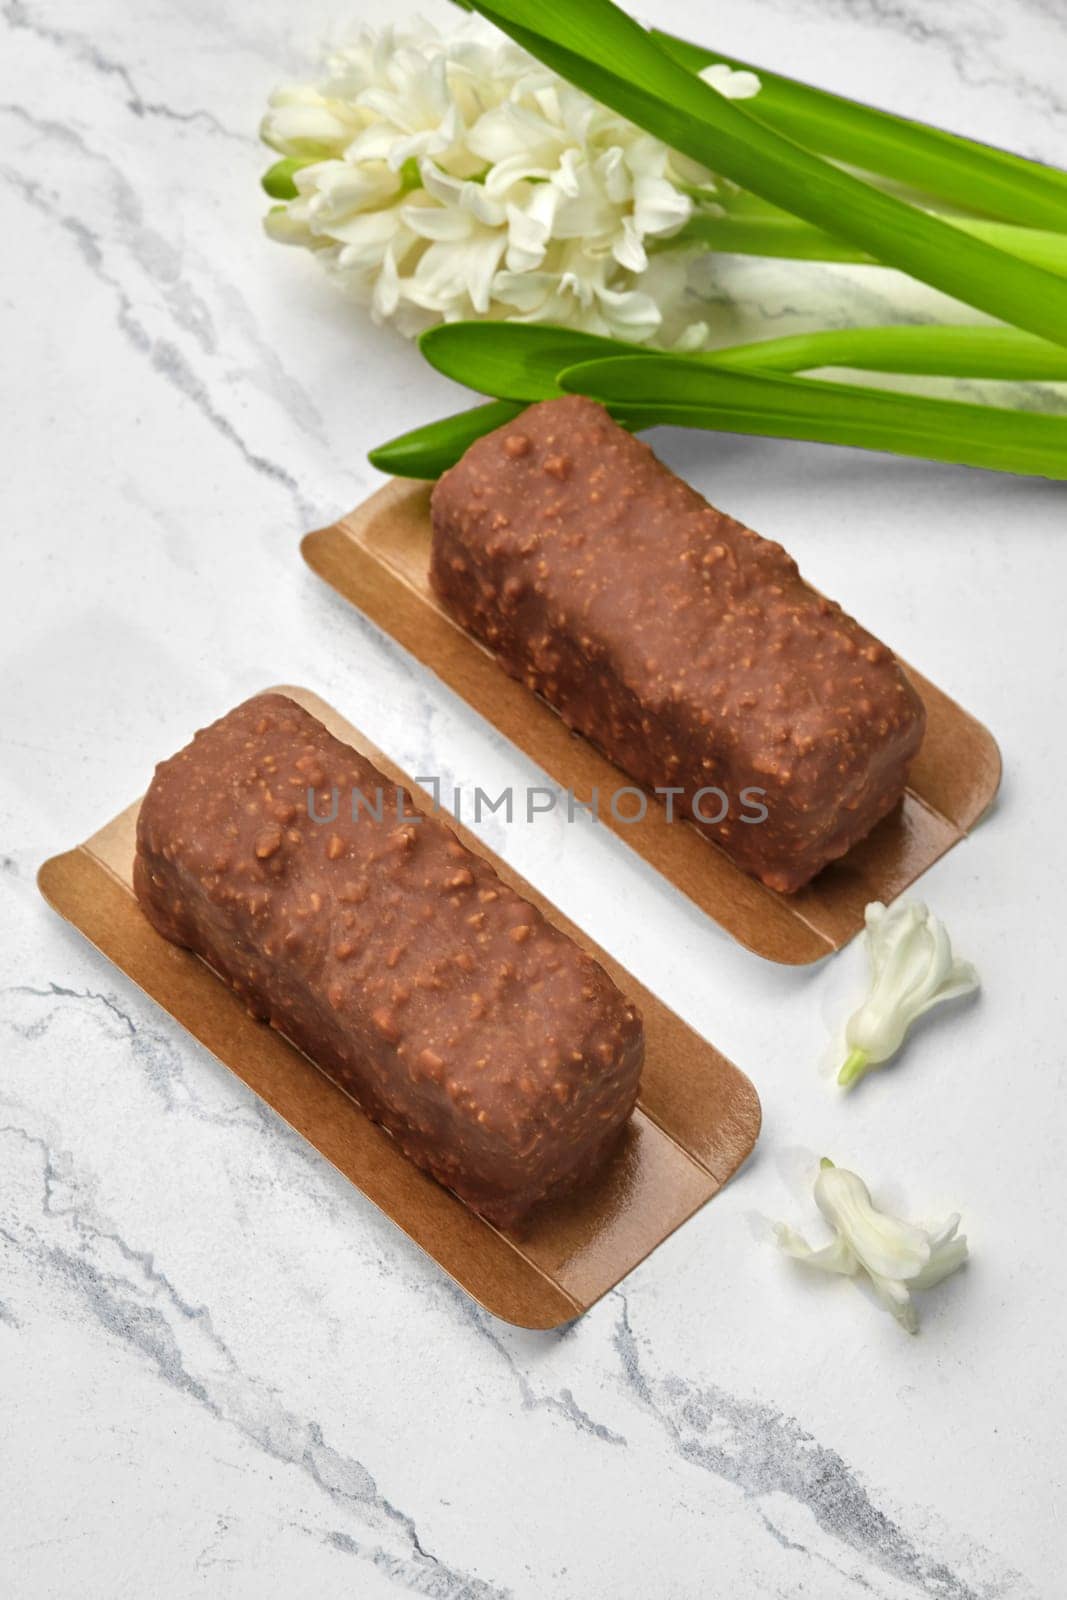 Artisan chocolate nut loaf cakes, perfect combination of texture and taste, presented on marble backdrop with delicate white hyacinth